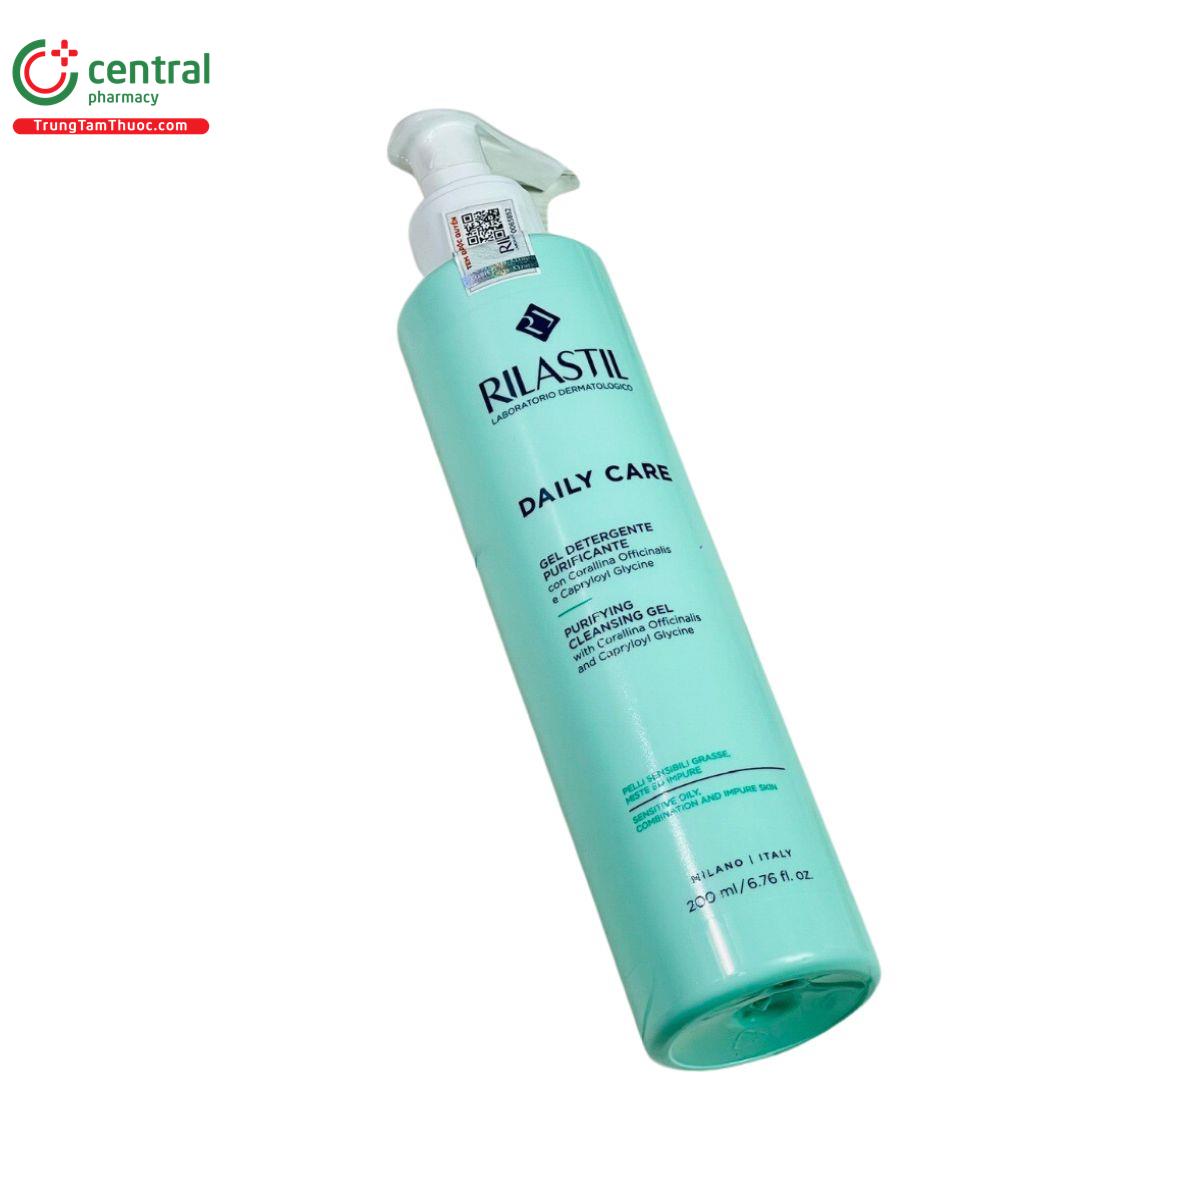 rilastil daily care purifying cleansing gel 4 L4014